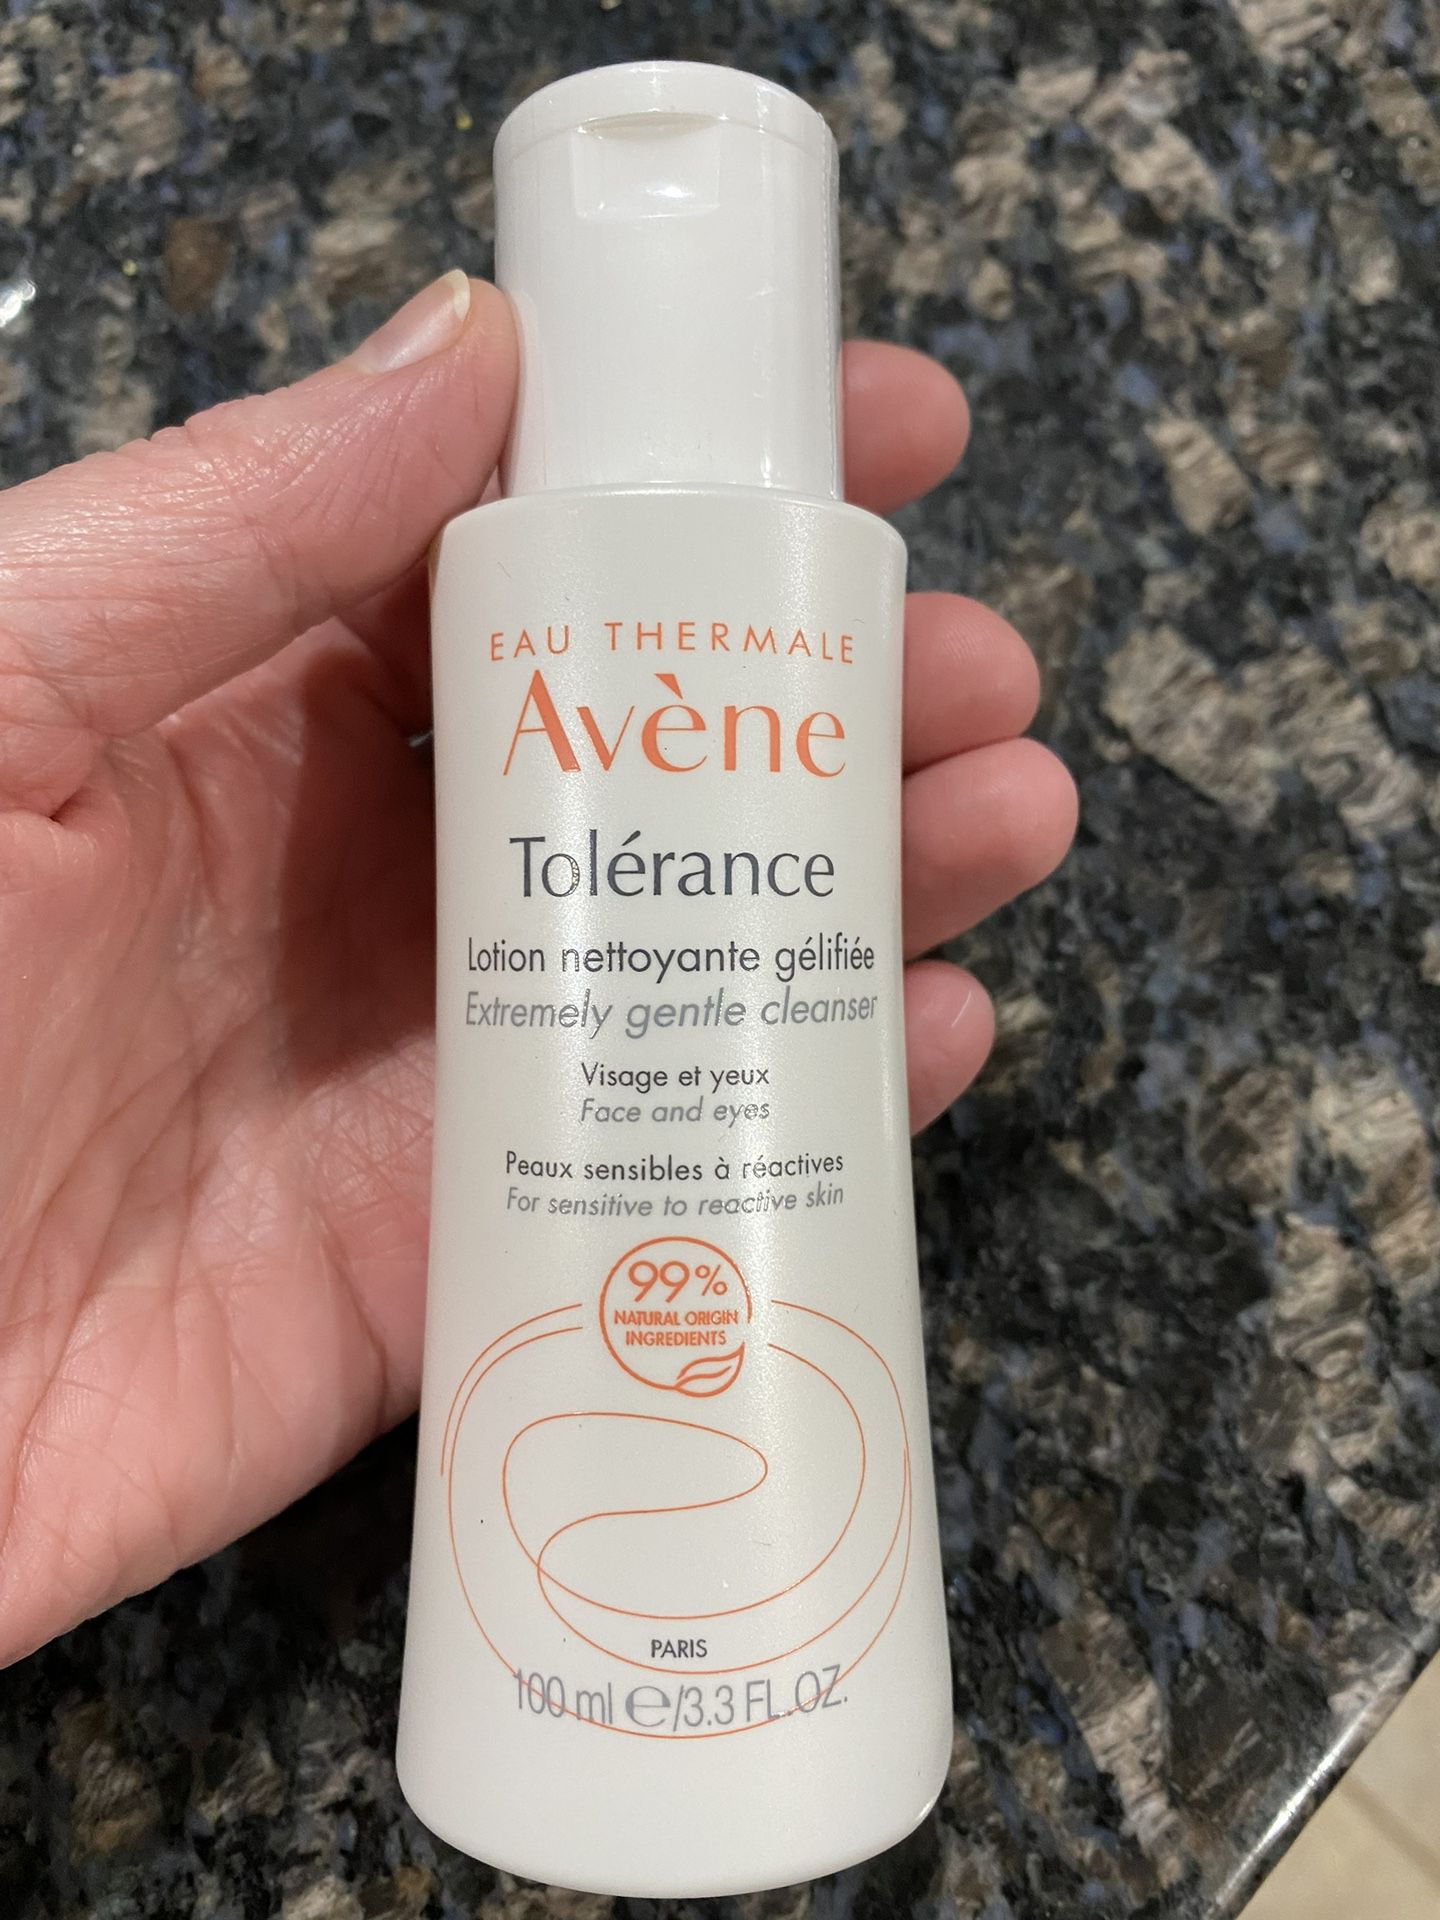 NEW AVENE TOLERANCE EXTREMELY GENTLE CLEANSER $5!